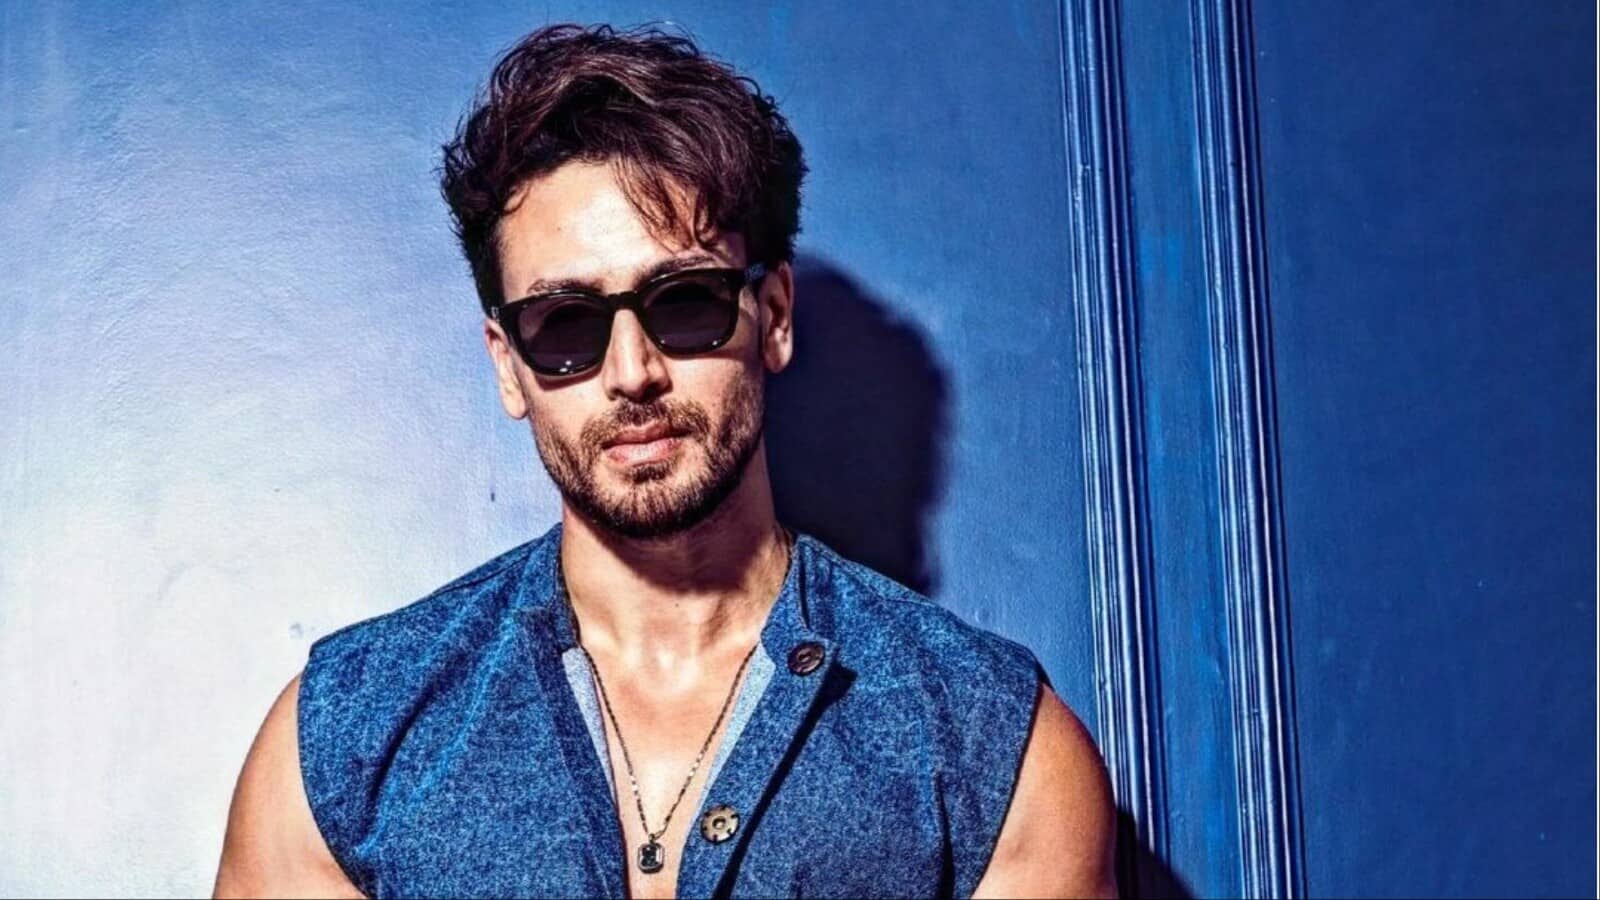 'One turn away': Director Ahmed Khan supports Tiger Shroff